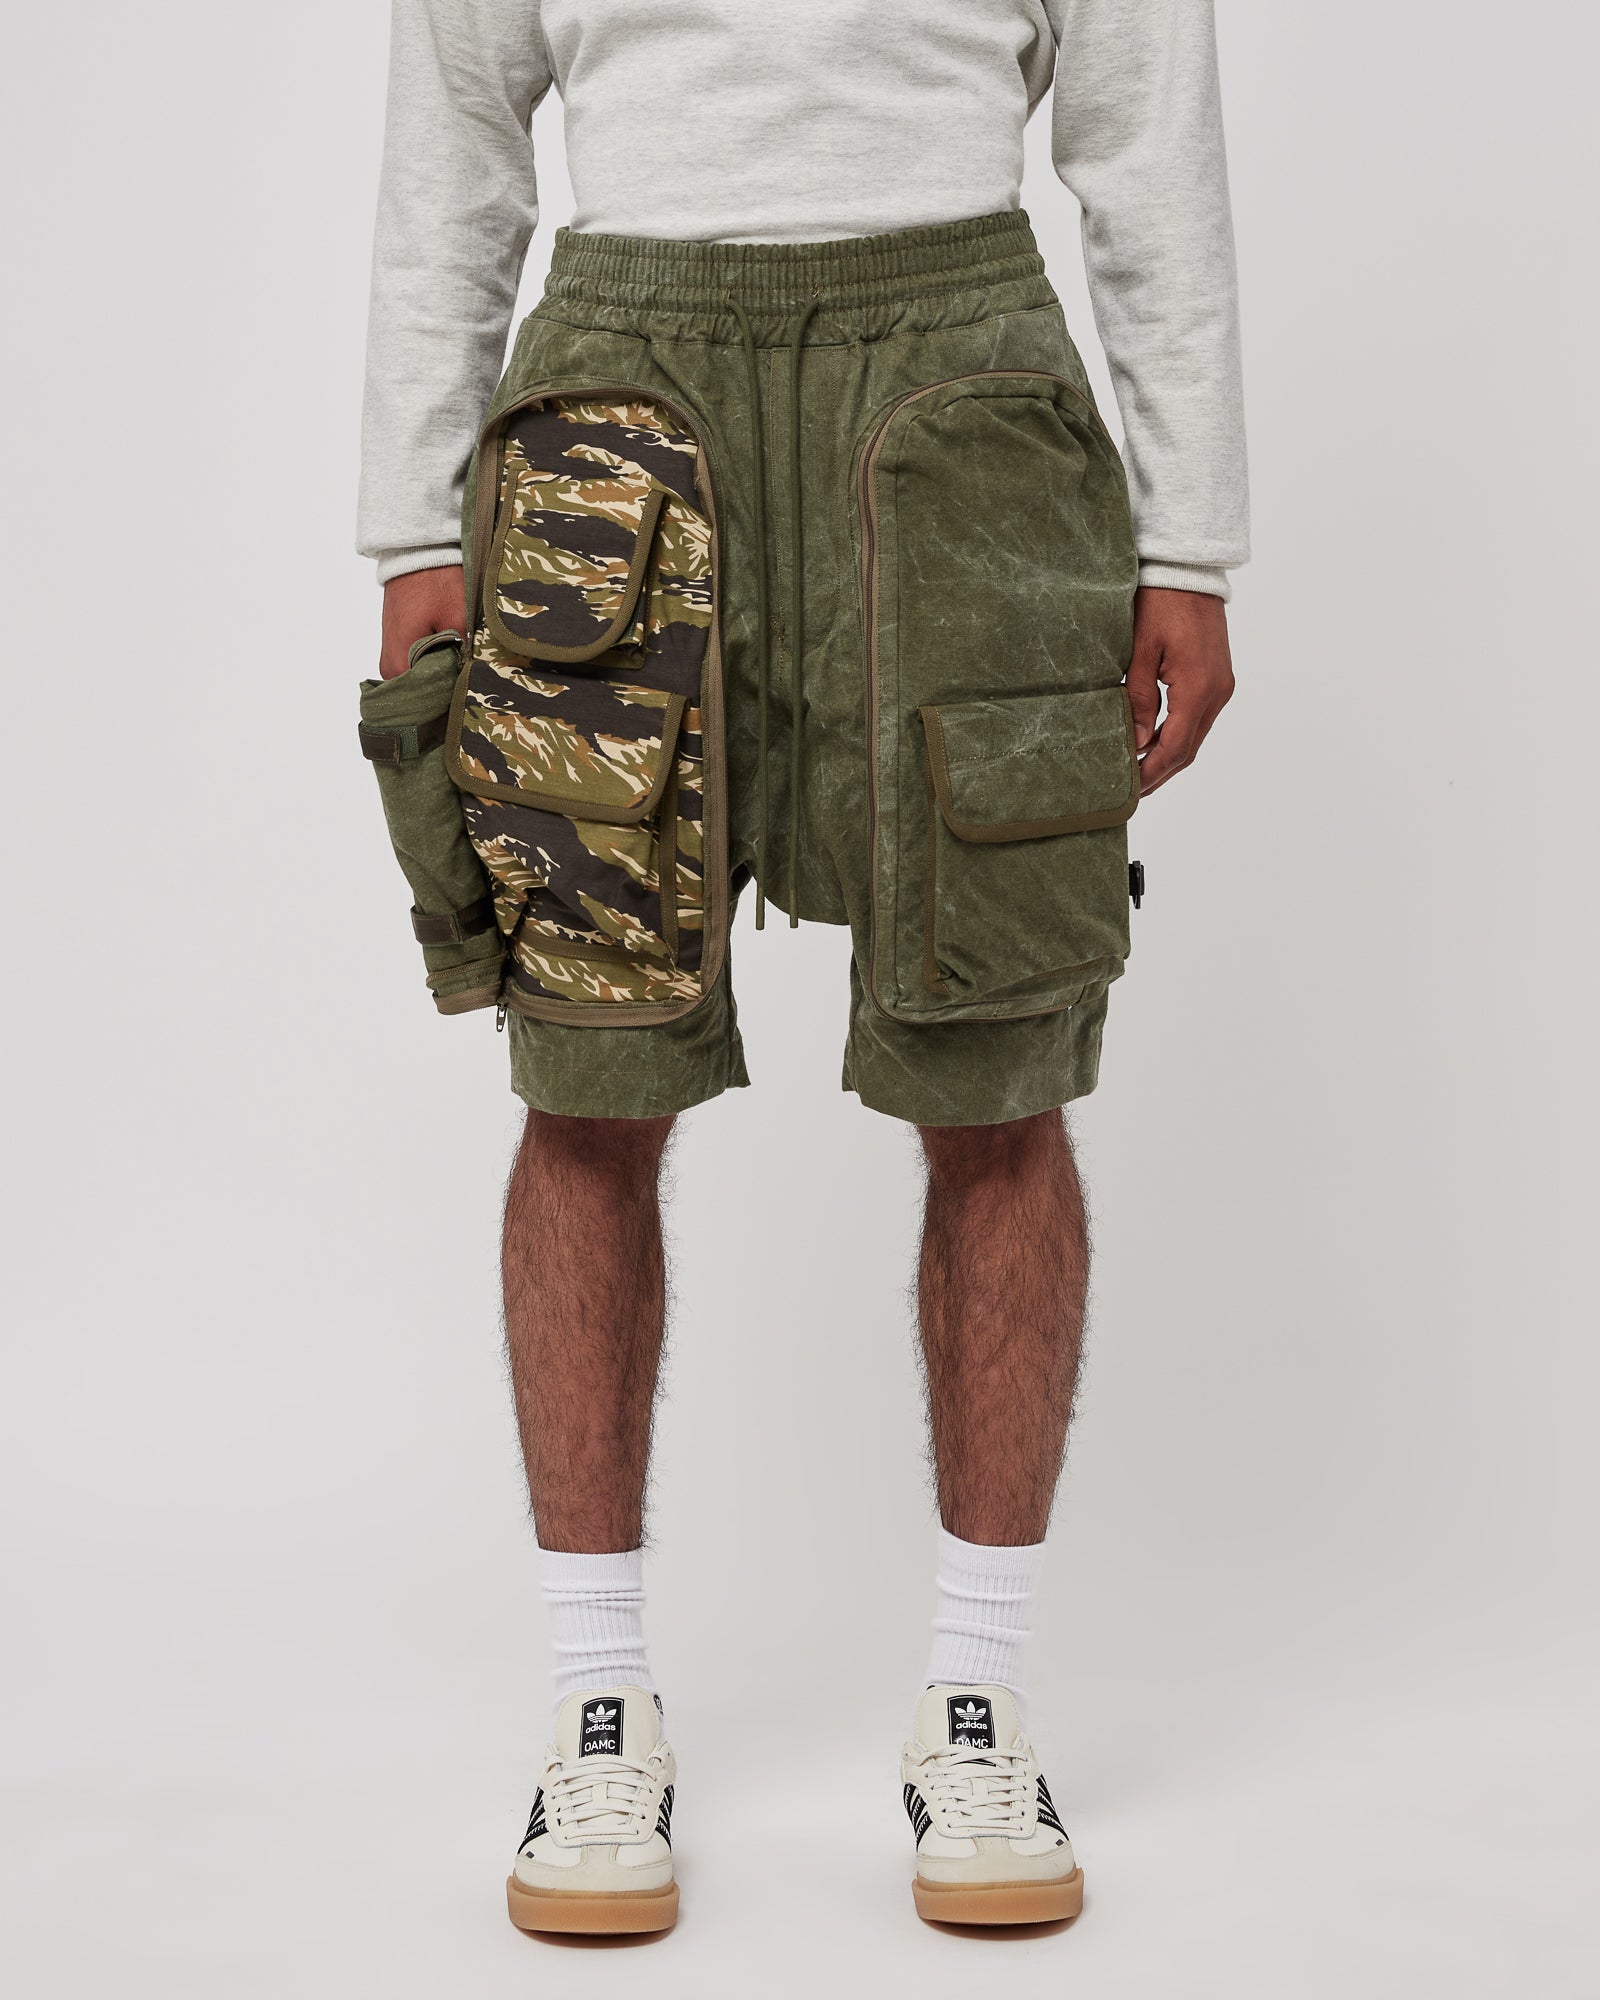 Clearance RYRJJ Men's Cargo Shorts Relaxed Fit Camouflage Short Pants  Outdoor Multi-Pocket Cotton Work Casual Shorts(NO Belt)(Army Green,M) 